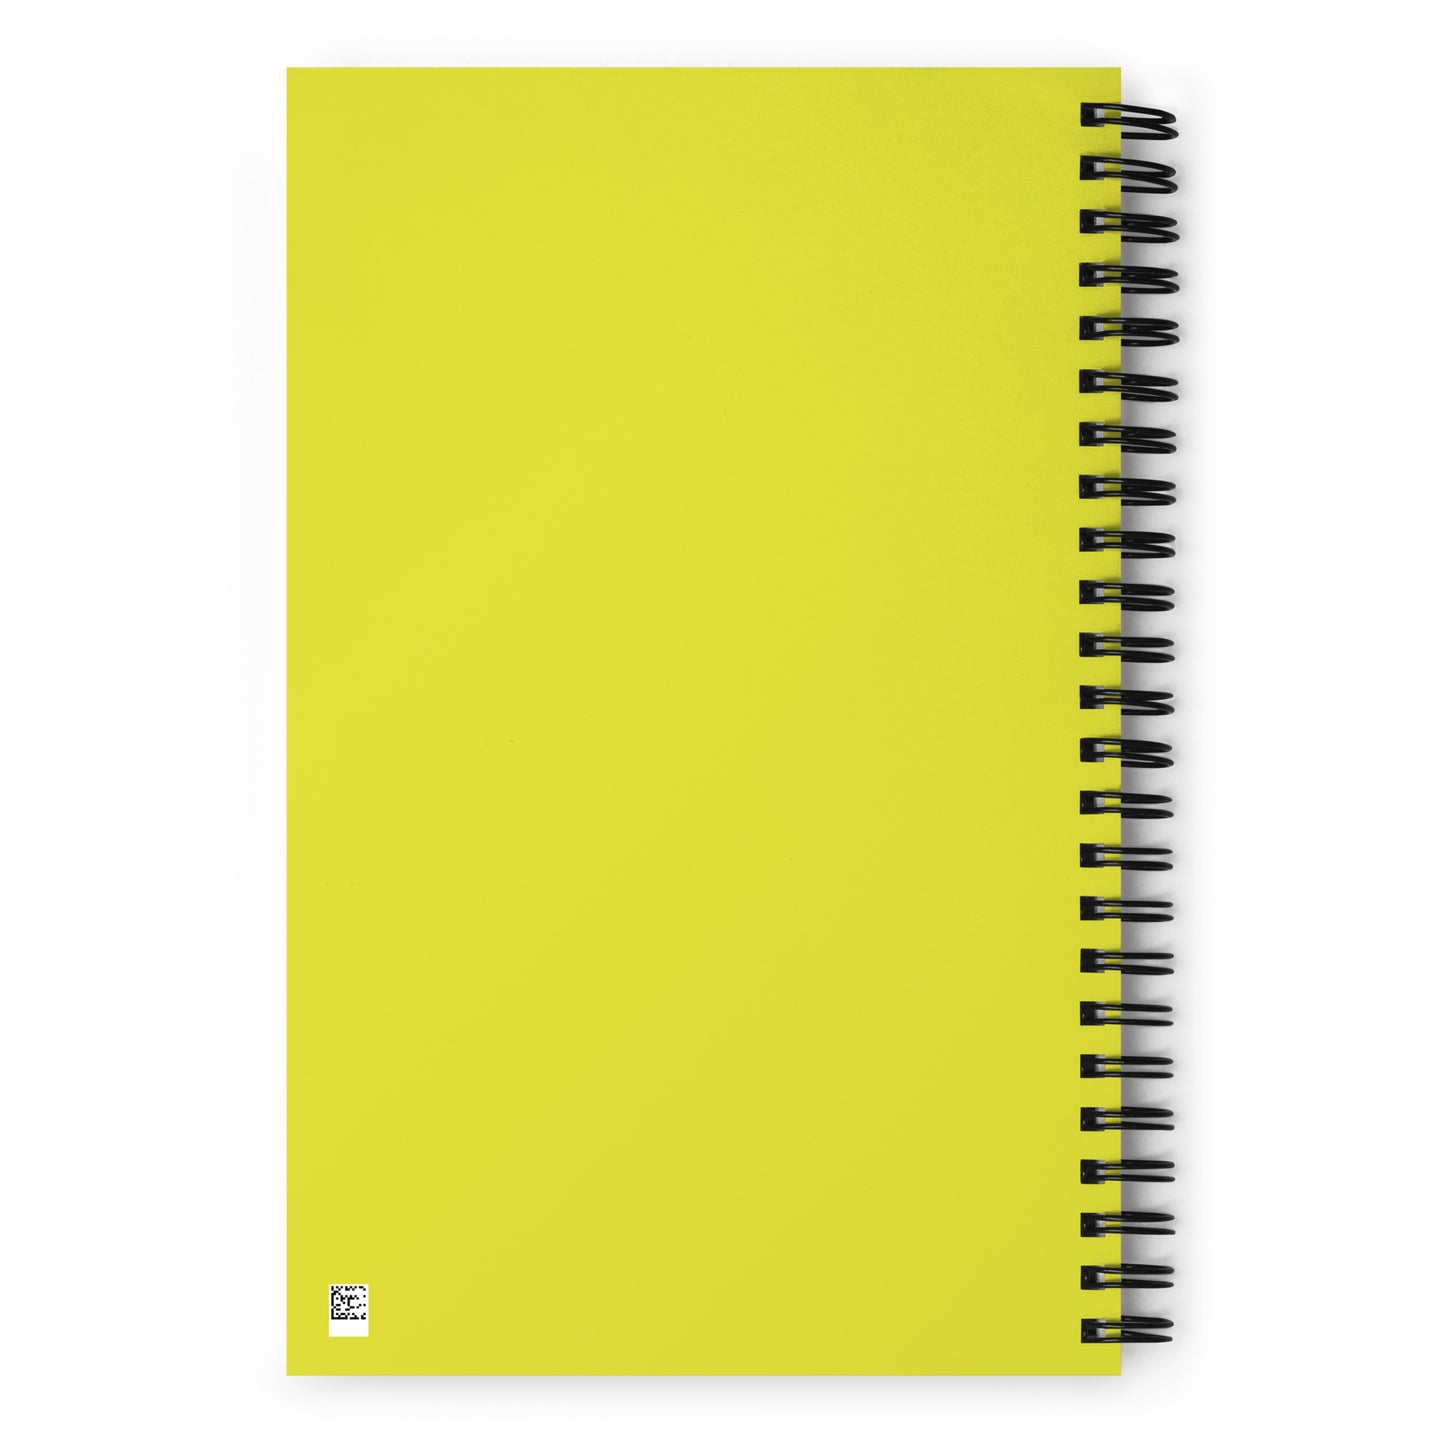 Aviation Gift Spiral Notebook - Yellow • LHR London • YHM Designs - Image 02